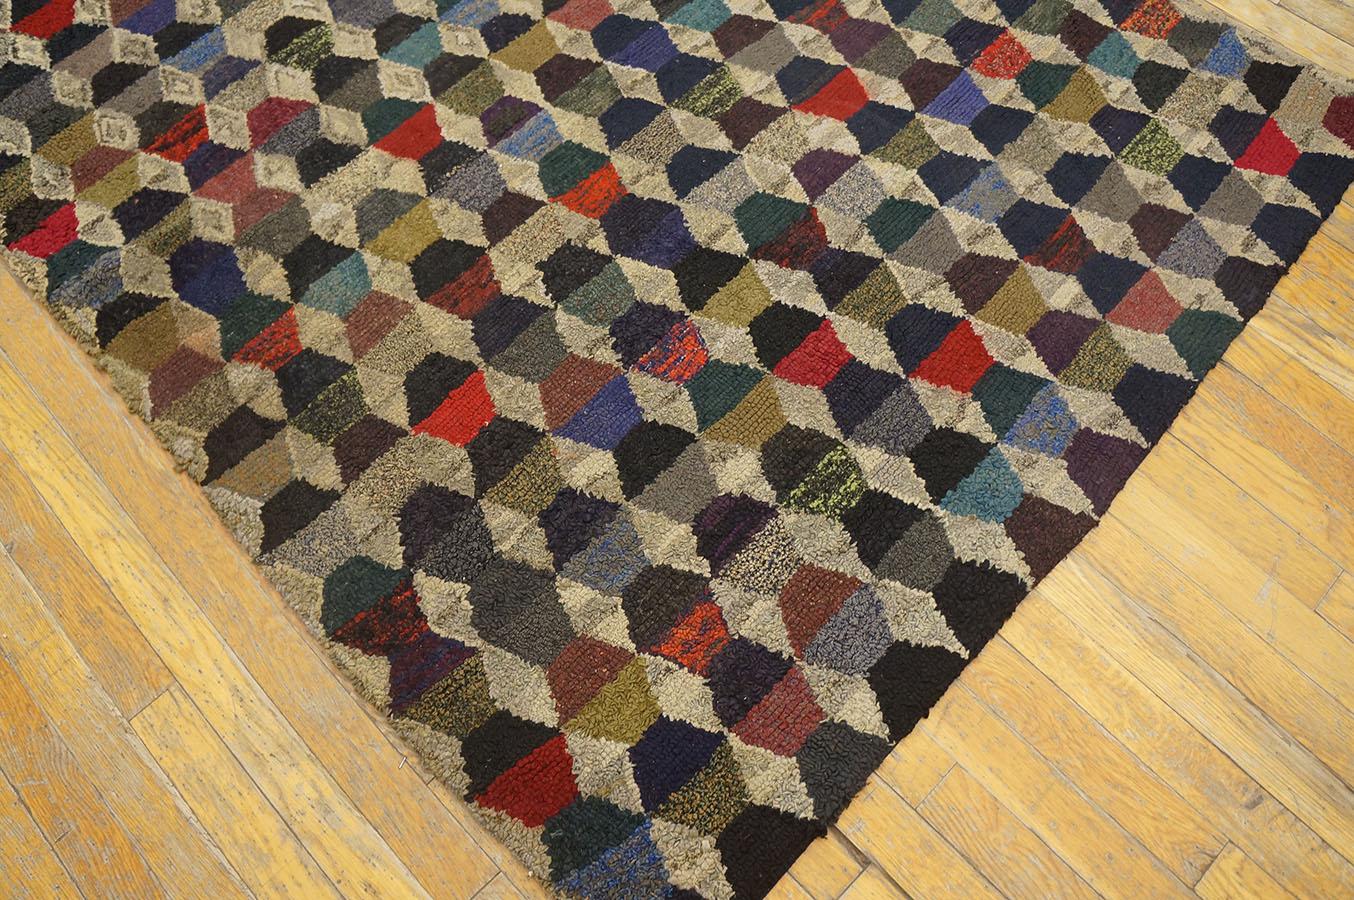 Early 20th Century American Hooked Rug ( 4'2'' x 5'4'' - 127 x 162 cm ) In Good Condition For Sale In New York, NY